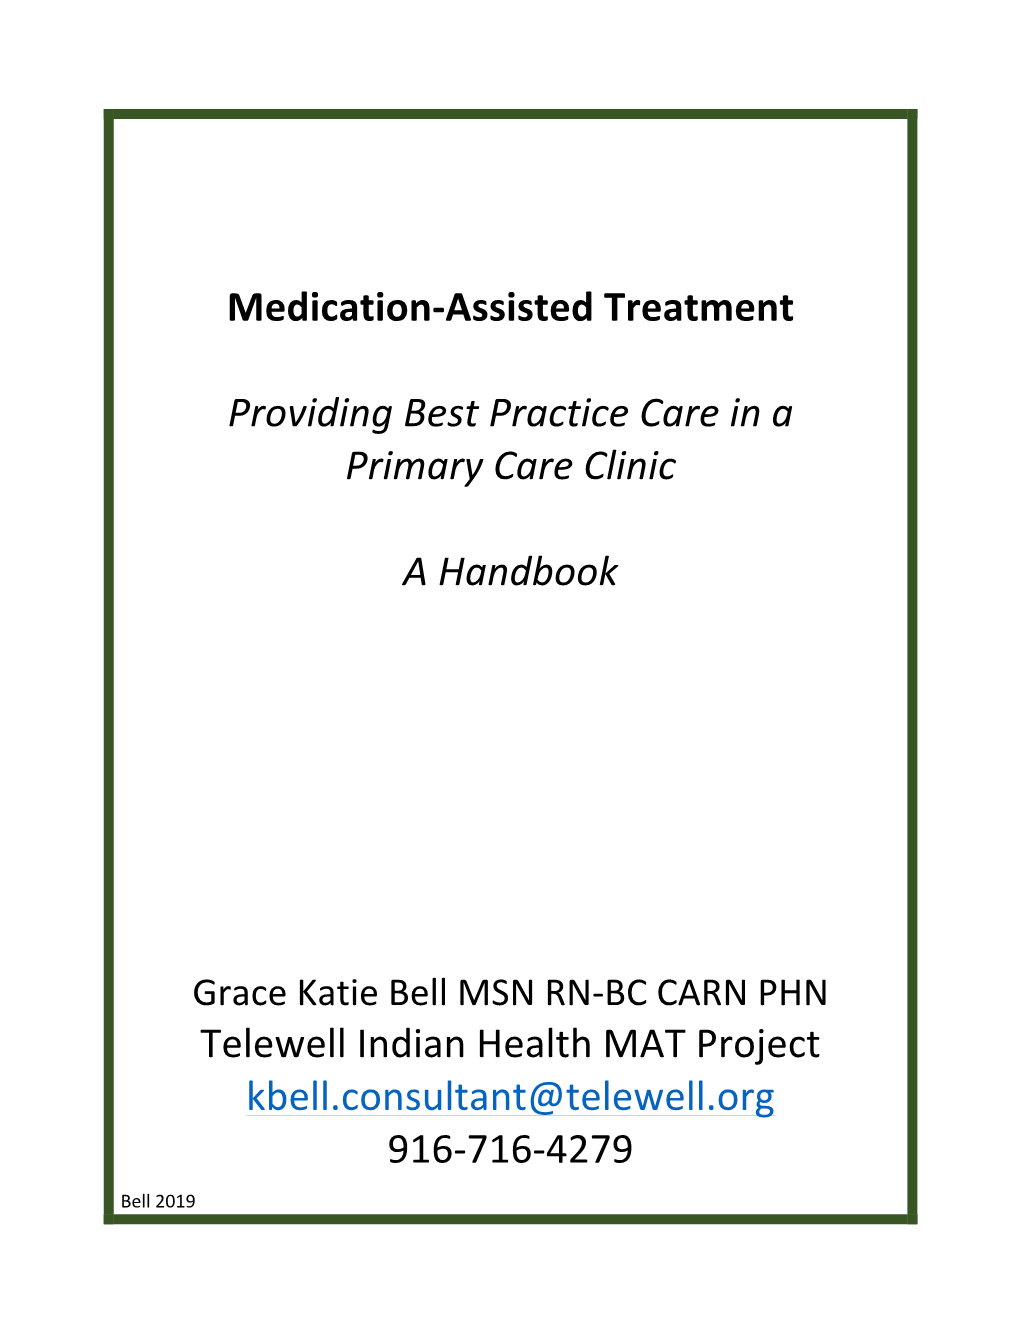 Medication-Assisted Treatment Providing Best Practice Care in A